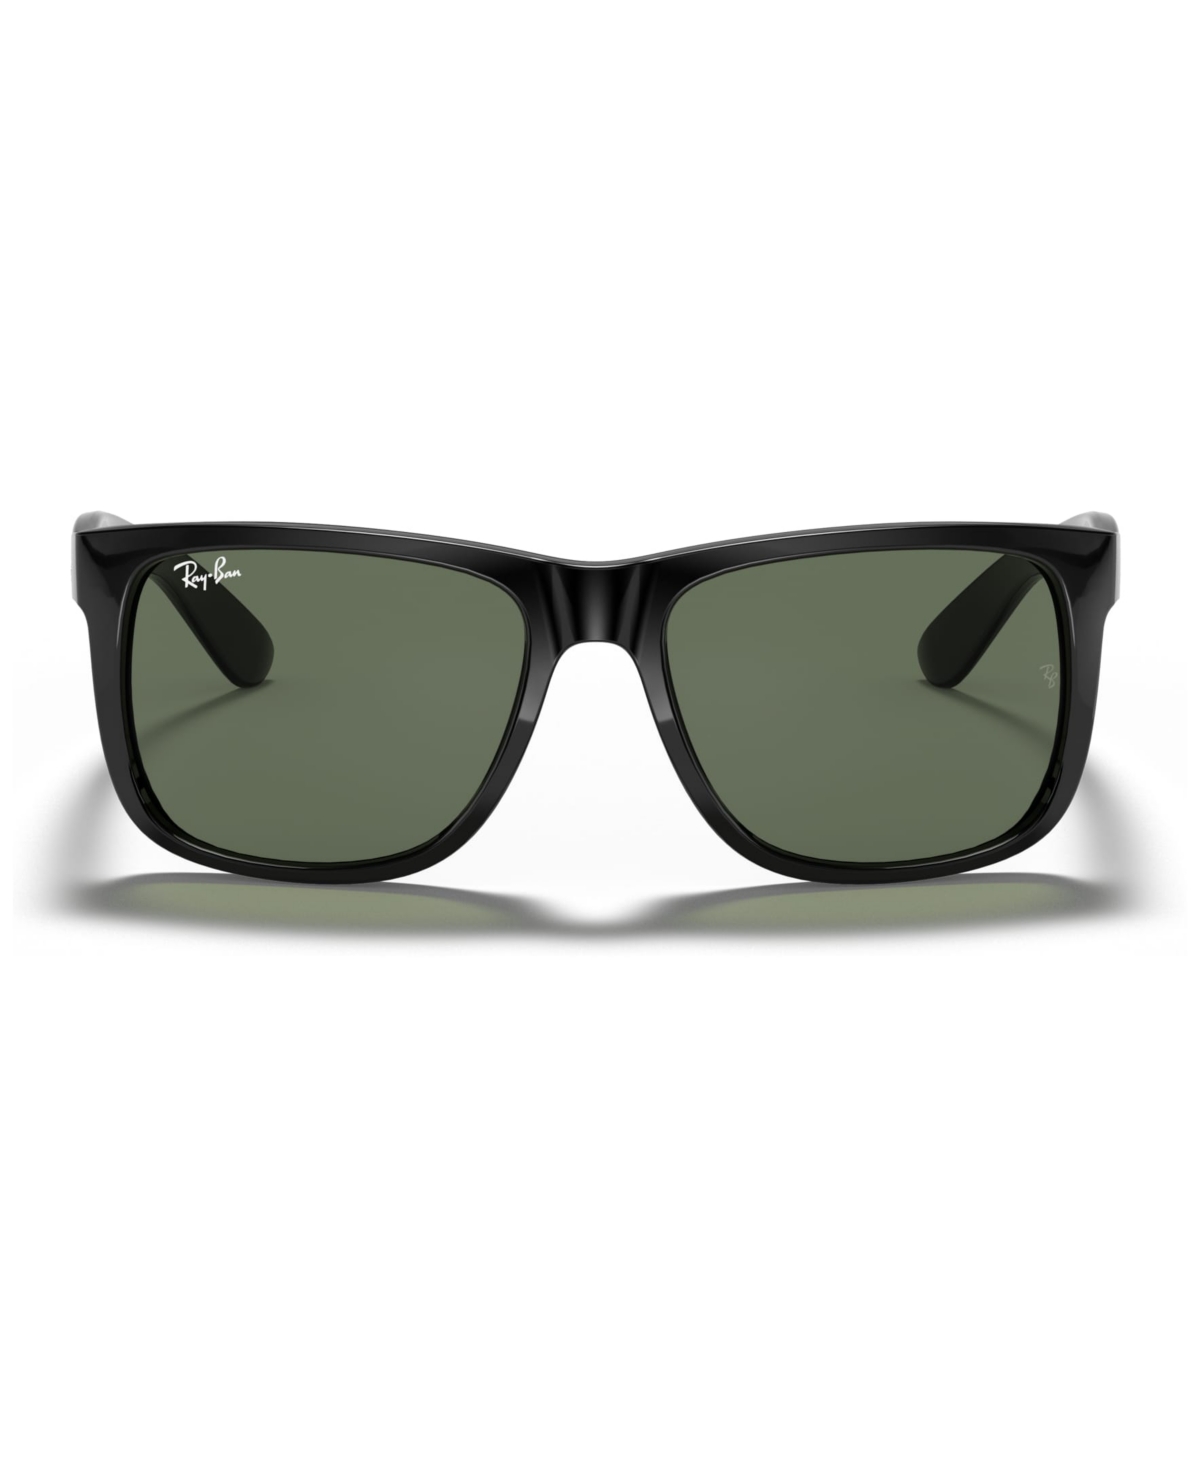 Ray Ban Unisex Sunglasses, Rb4165 Justin In Black,green